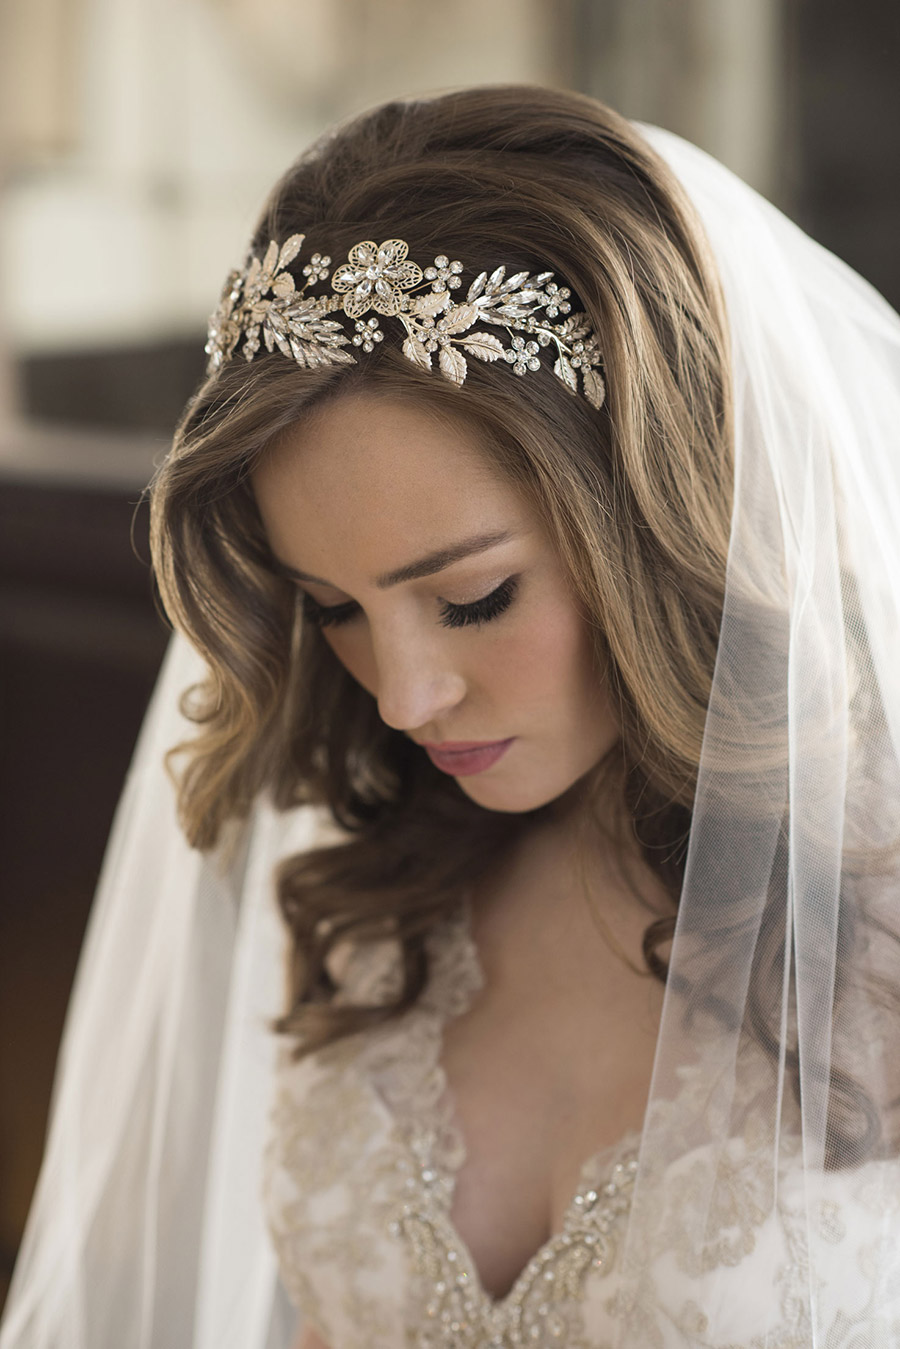 Wedding Dress Accessories Lace, Lace Braided Ribbon